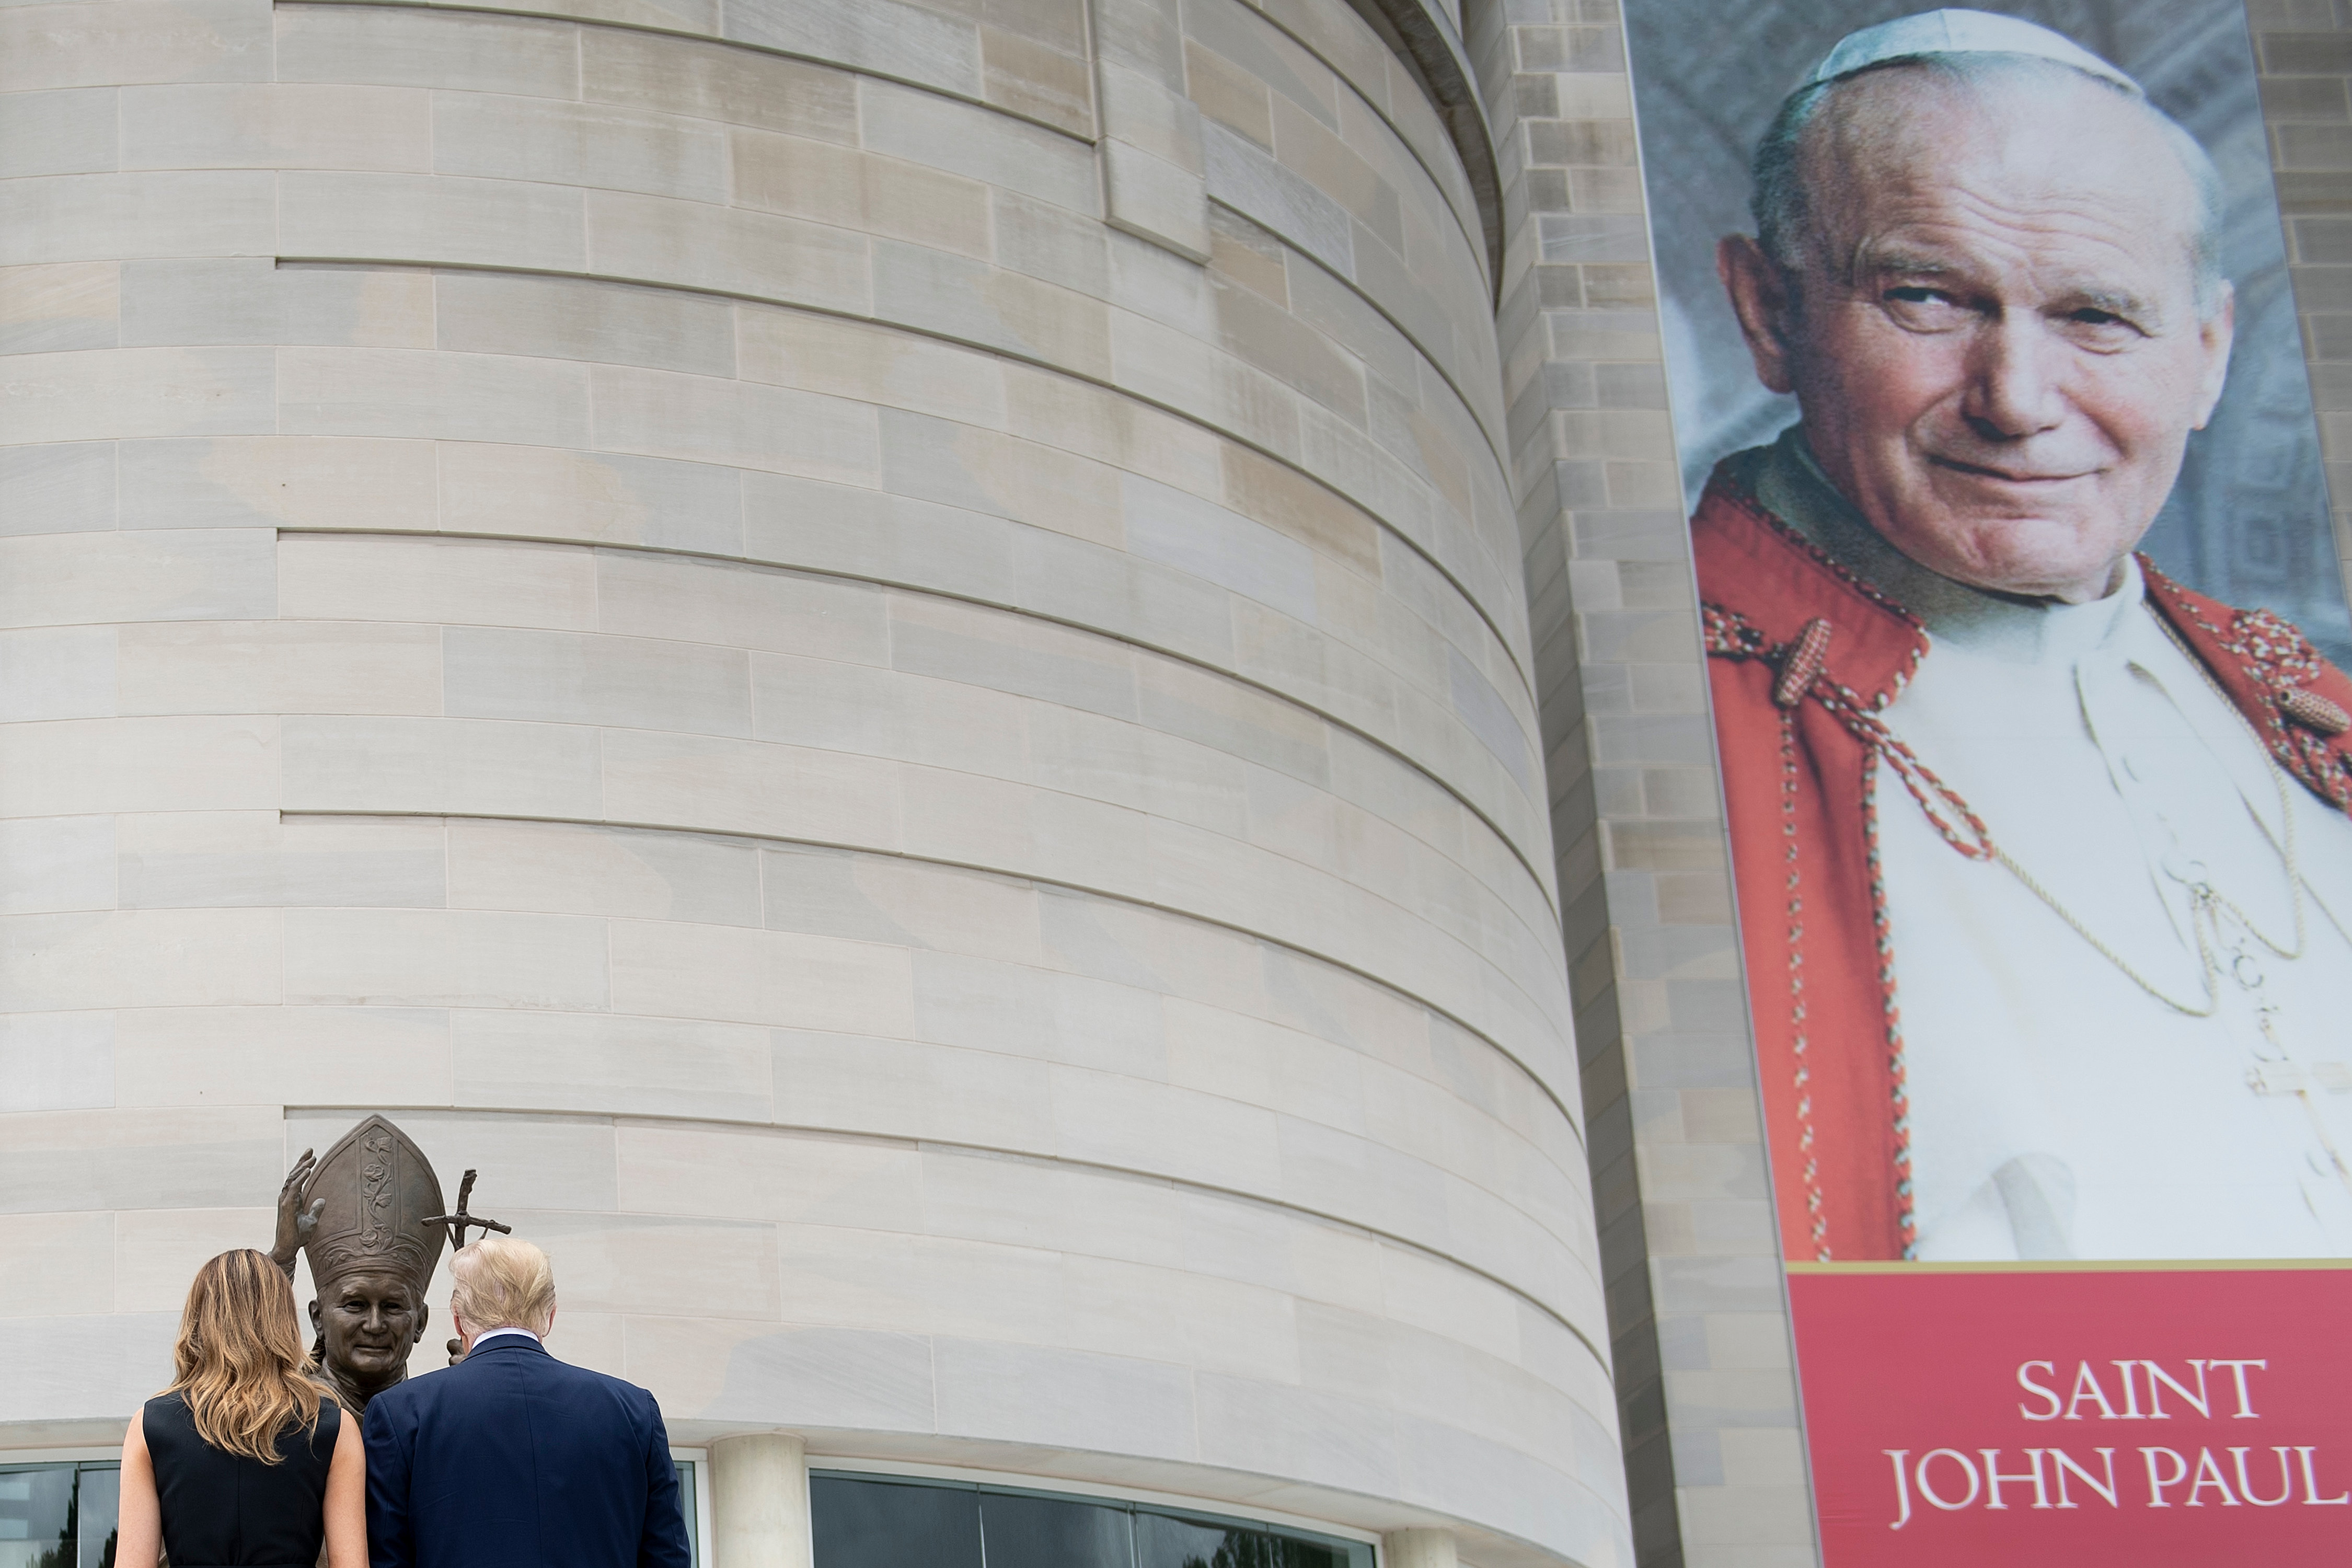 US President Donald Trump and First Lady Melania Trump visit the Saint John Paul II National Shrine, to lay a ceremonial wreath and observe a moment of remembrance under the Statue of Saint John Paul II on June 2, 2020 in Washington,DC. (Photo by BRENDAN SMIALOWSKI/AFP via Getty Images)